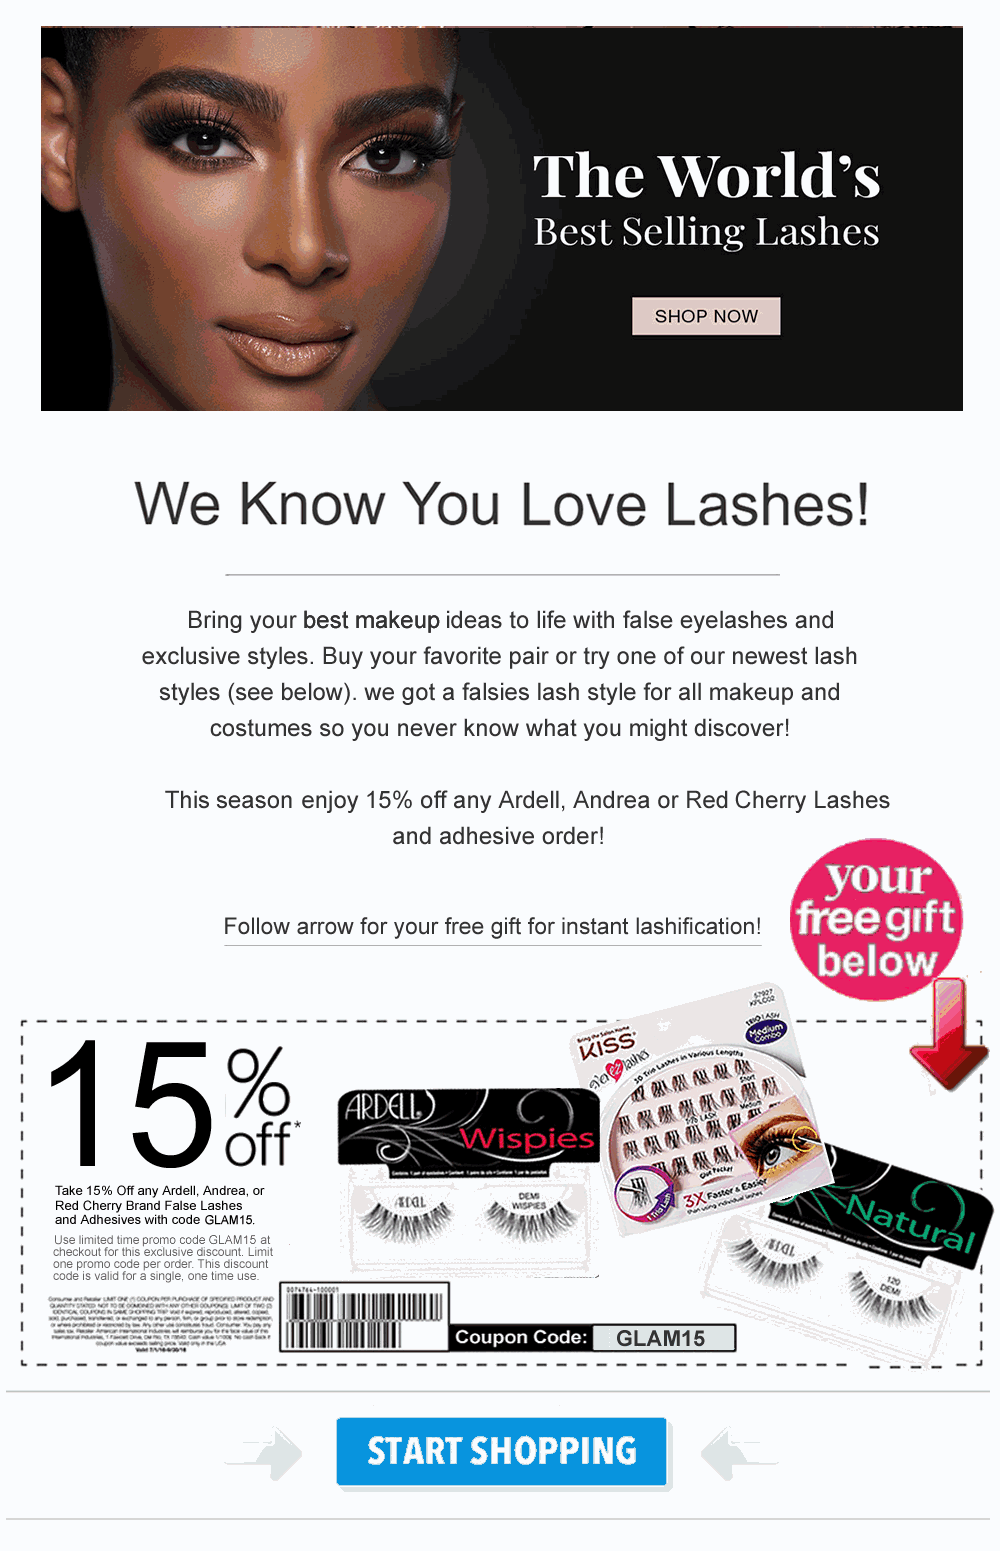 Take 15% off your order for eyelashes and adhesives order using code GLAM15 at checkout.